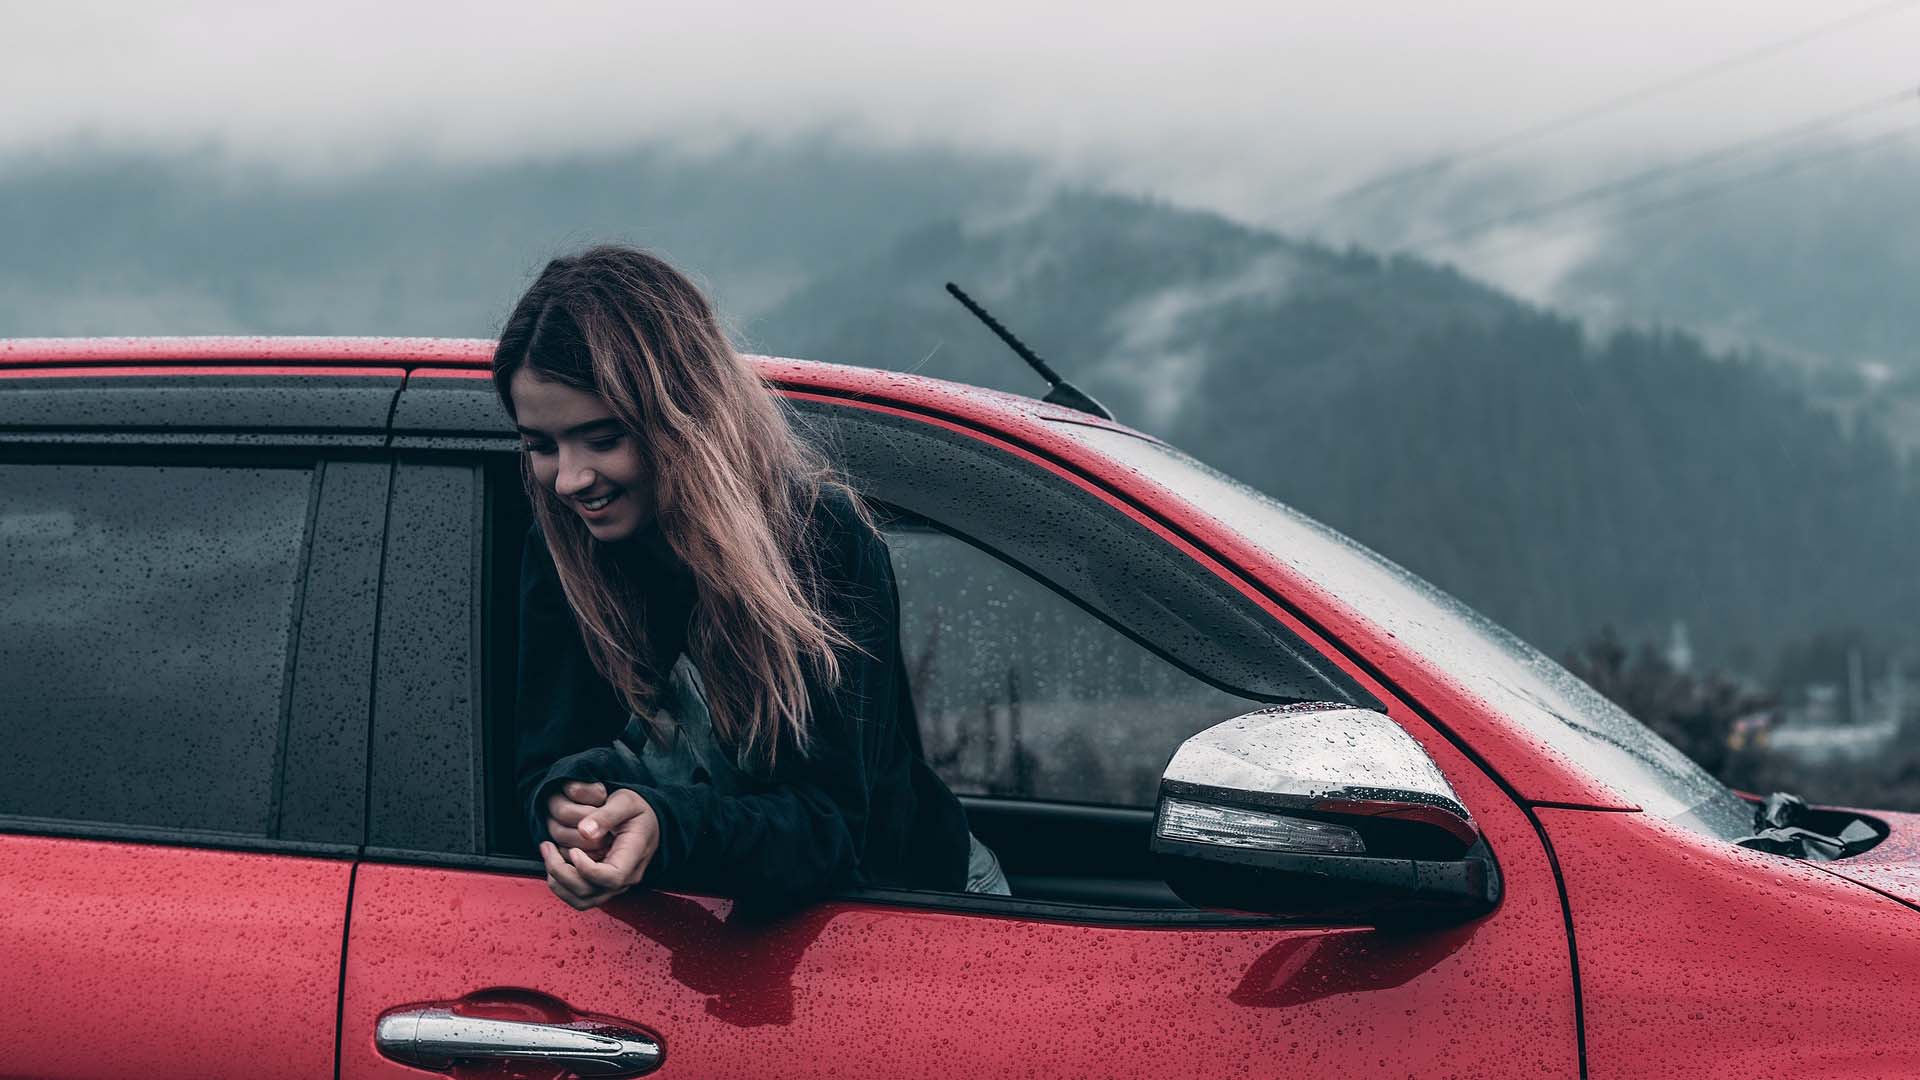 young woman with long hair hanging out of red car window